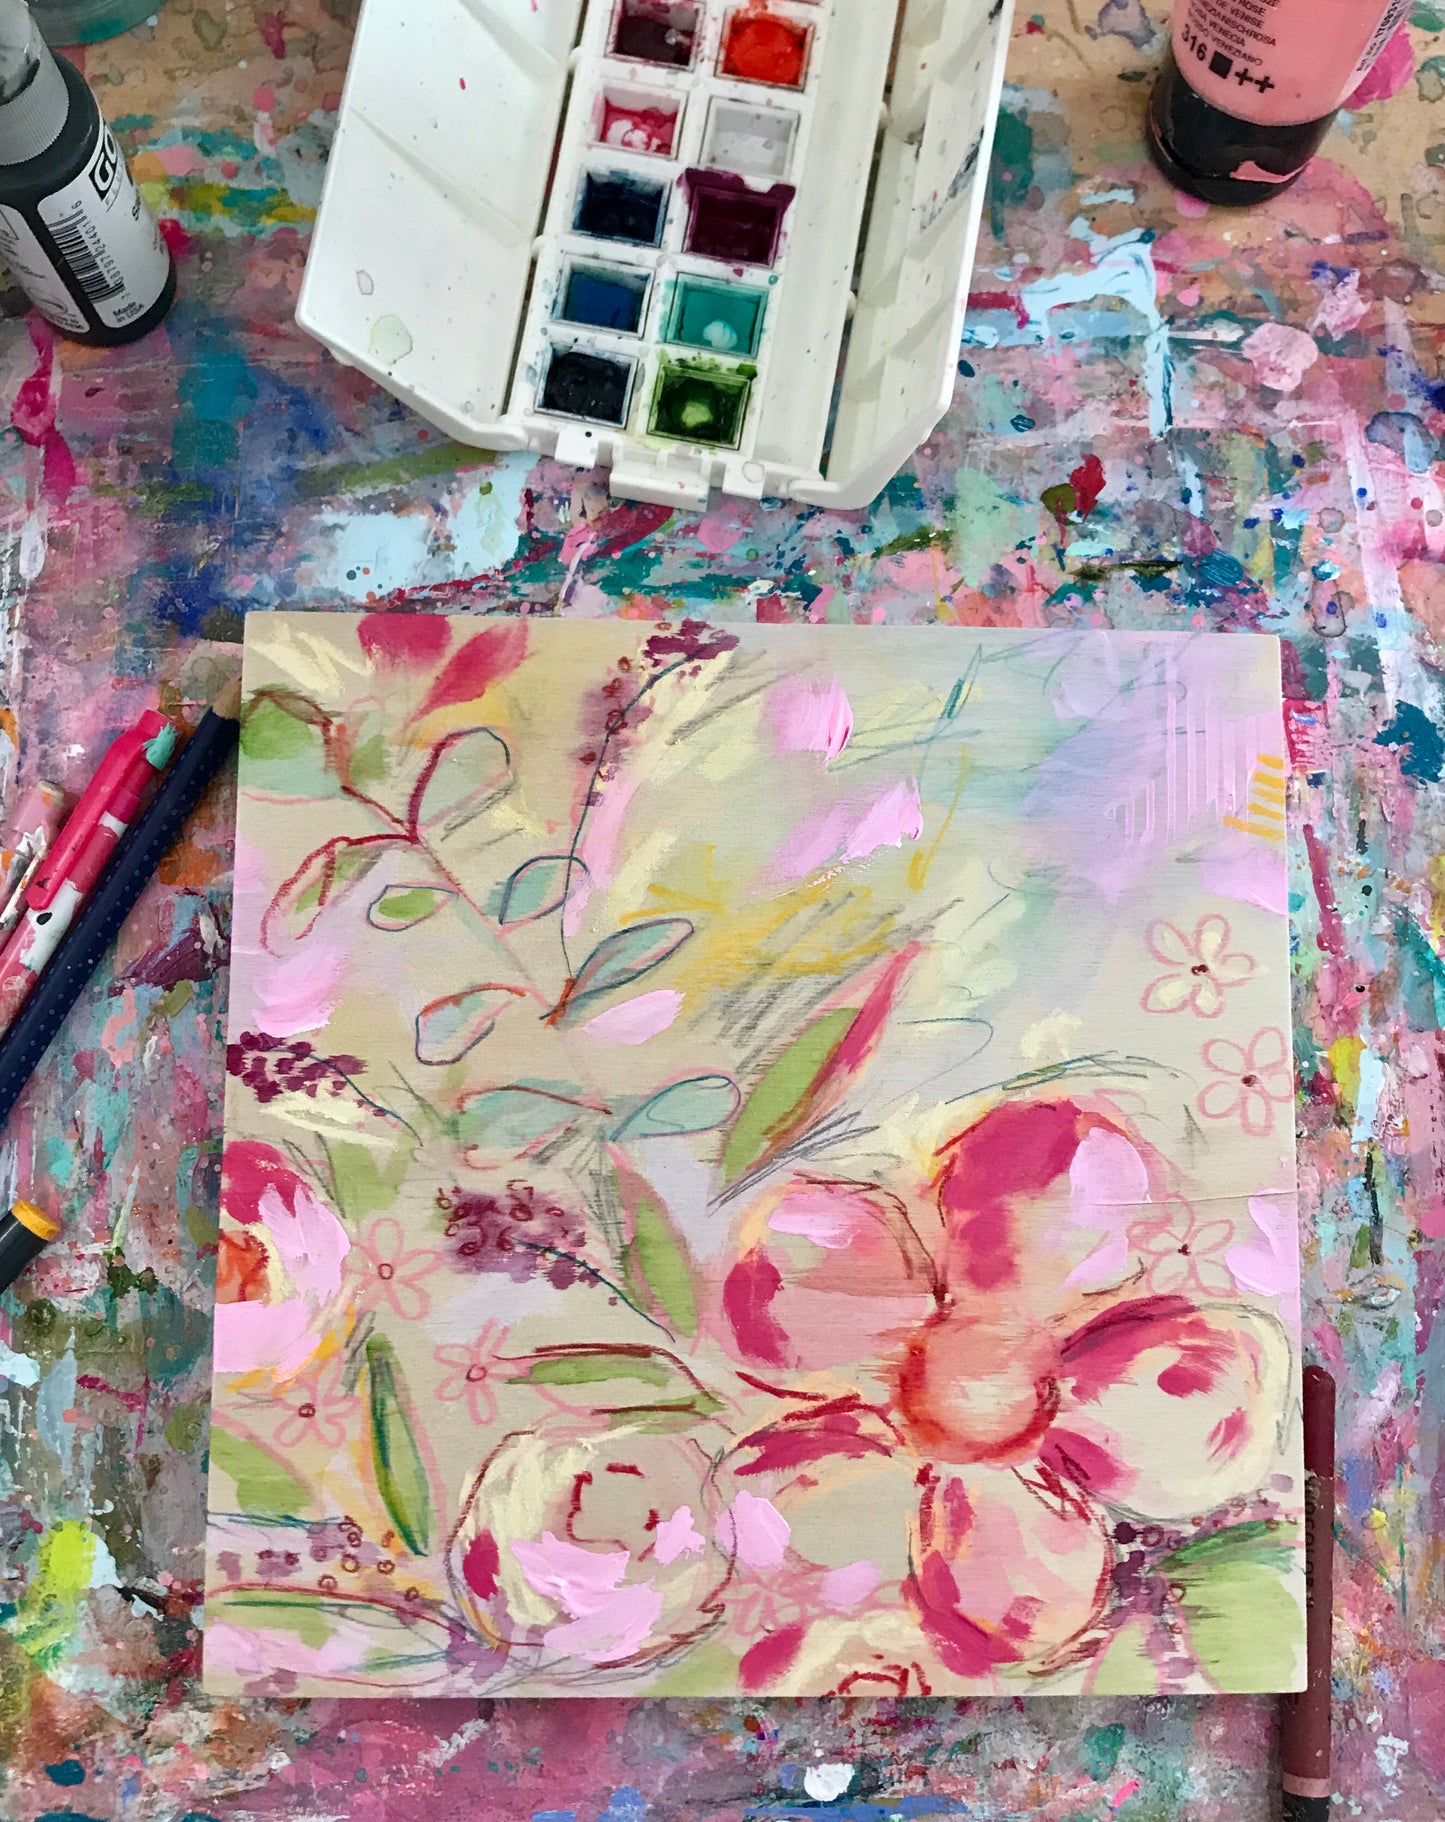 New Spring Floral Mixed Media Painting on 8x8 inch wood panel no.10 - Bethany Joy Art